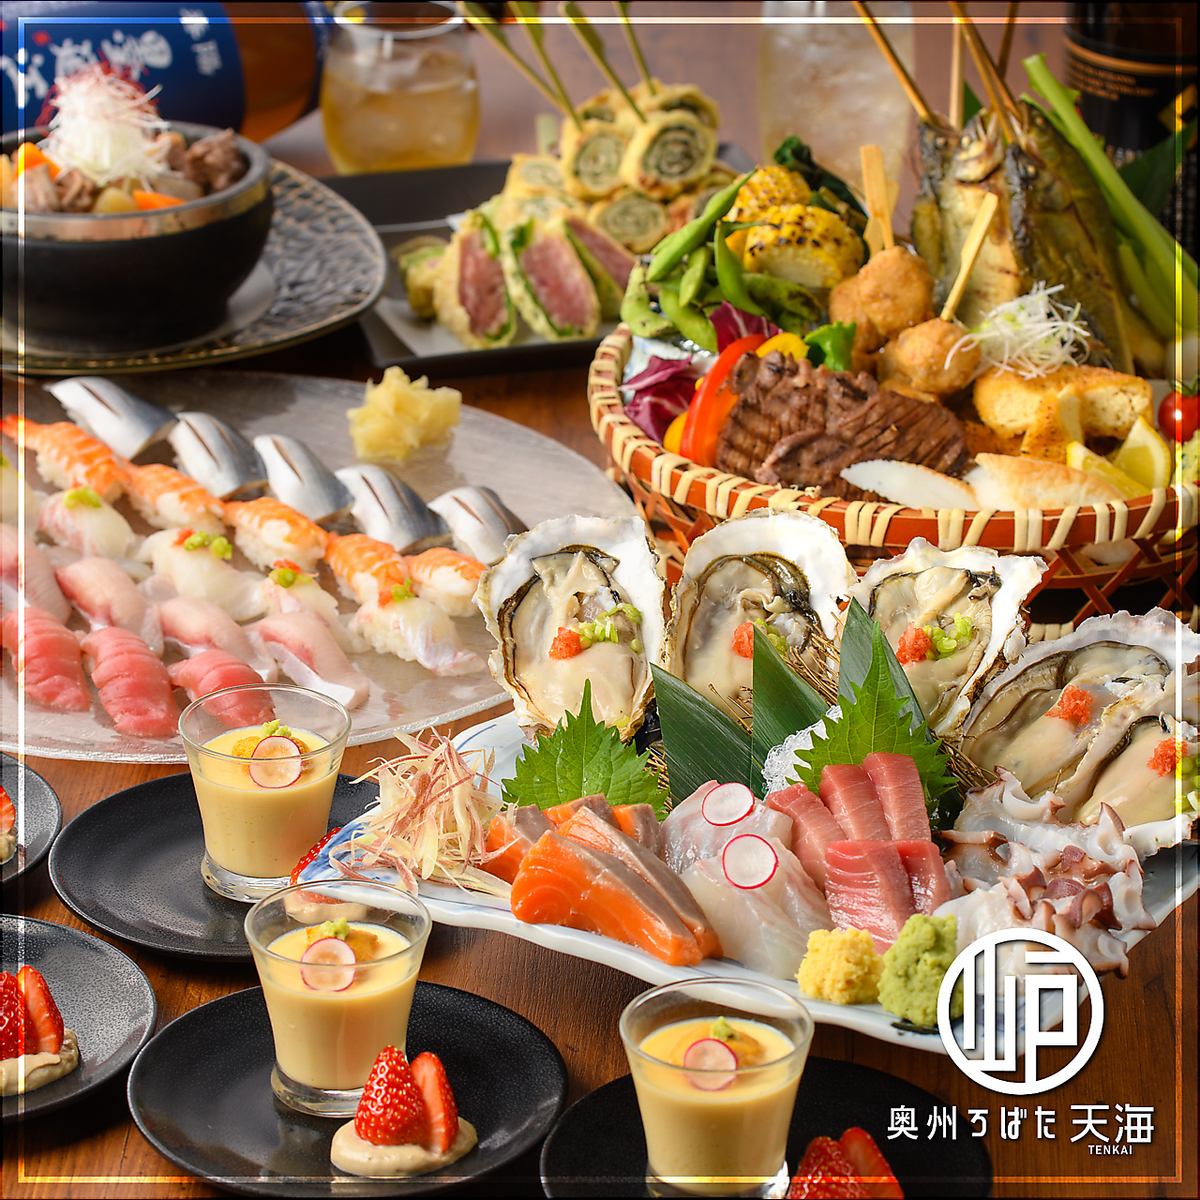 Private banquets available for up to 80 people! Courses with all-you-can-drink start at 4,000 yen!